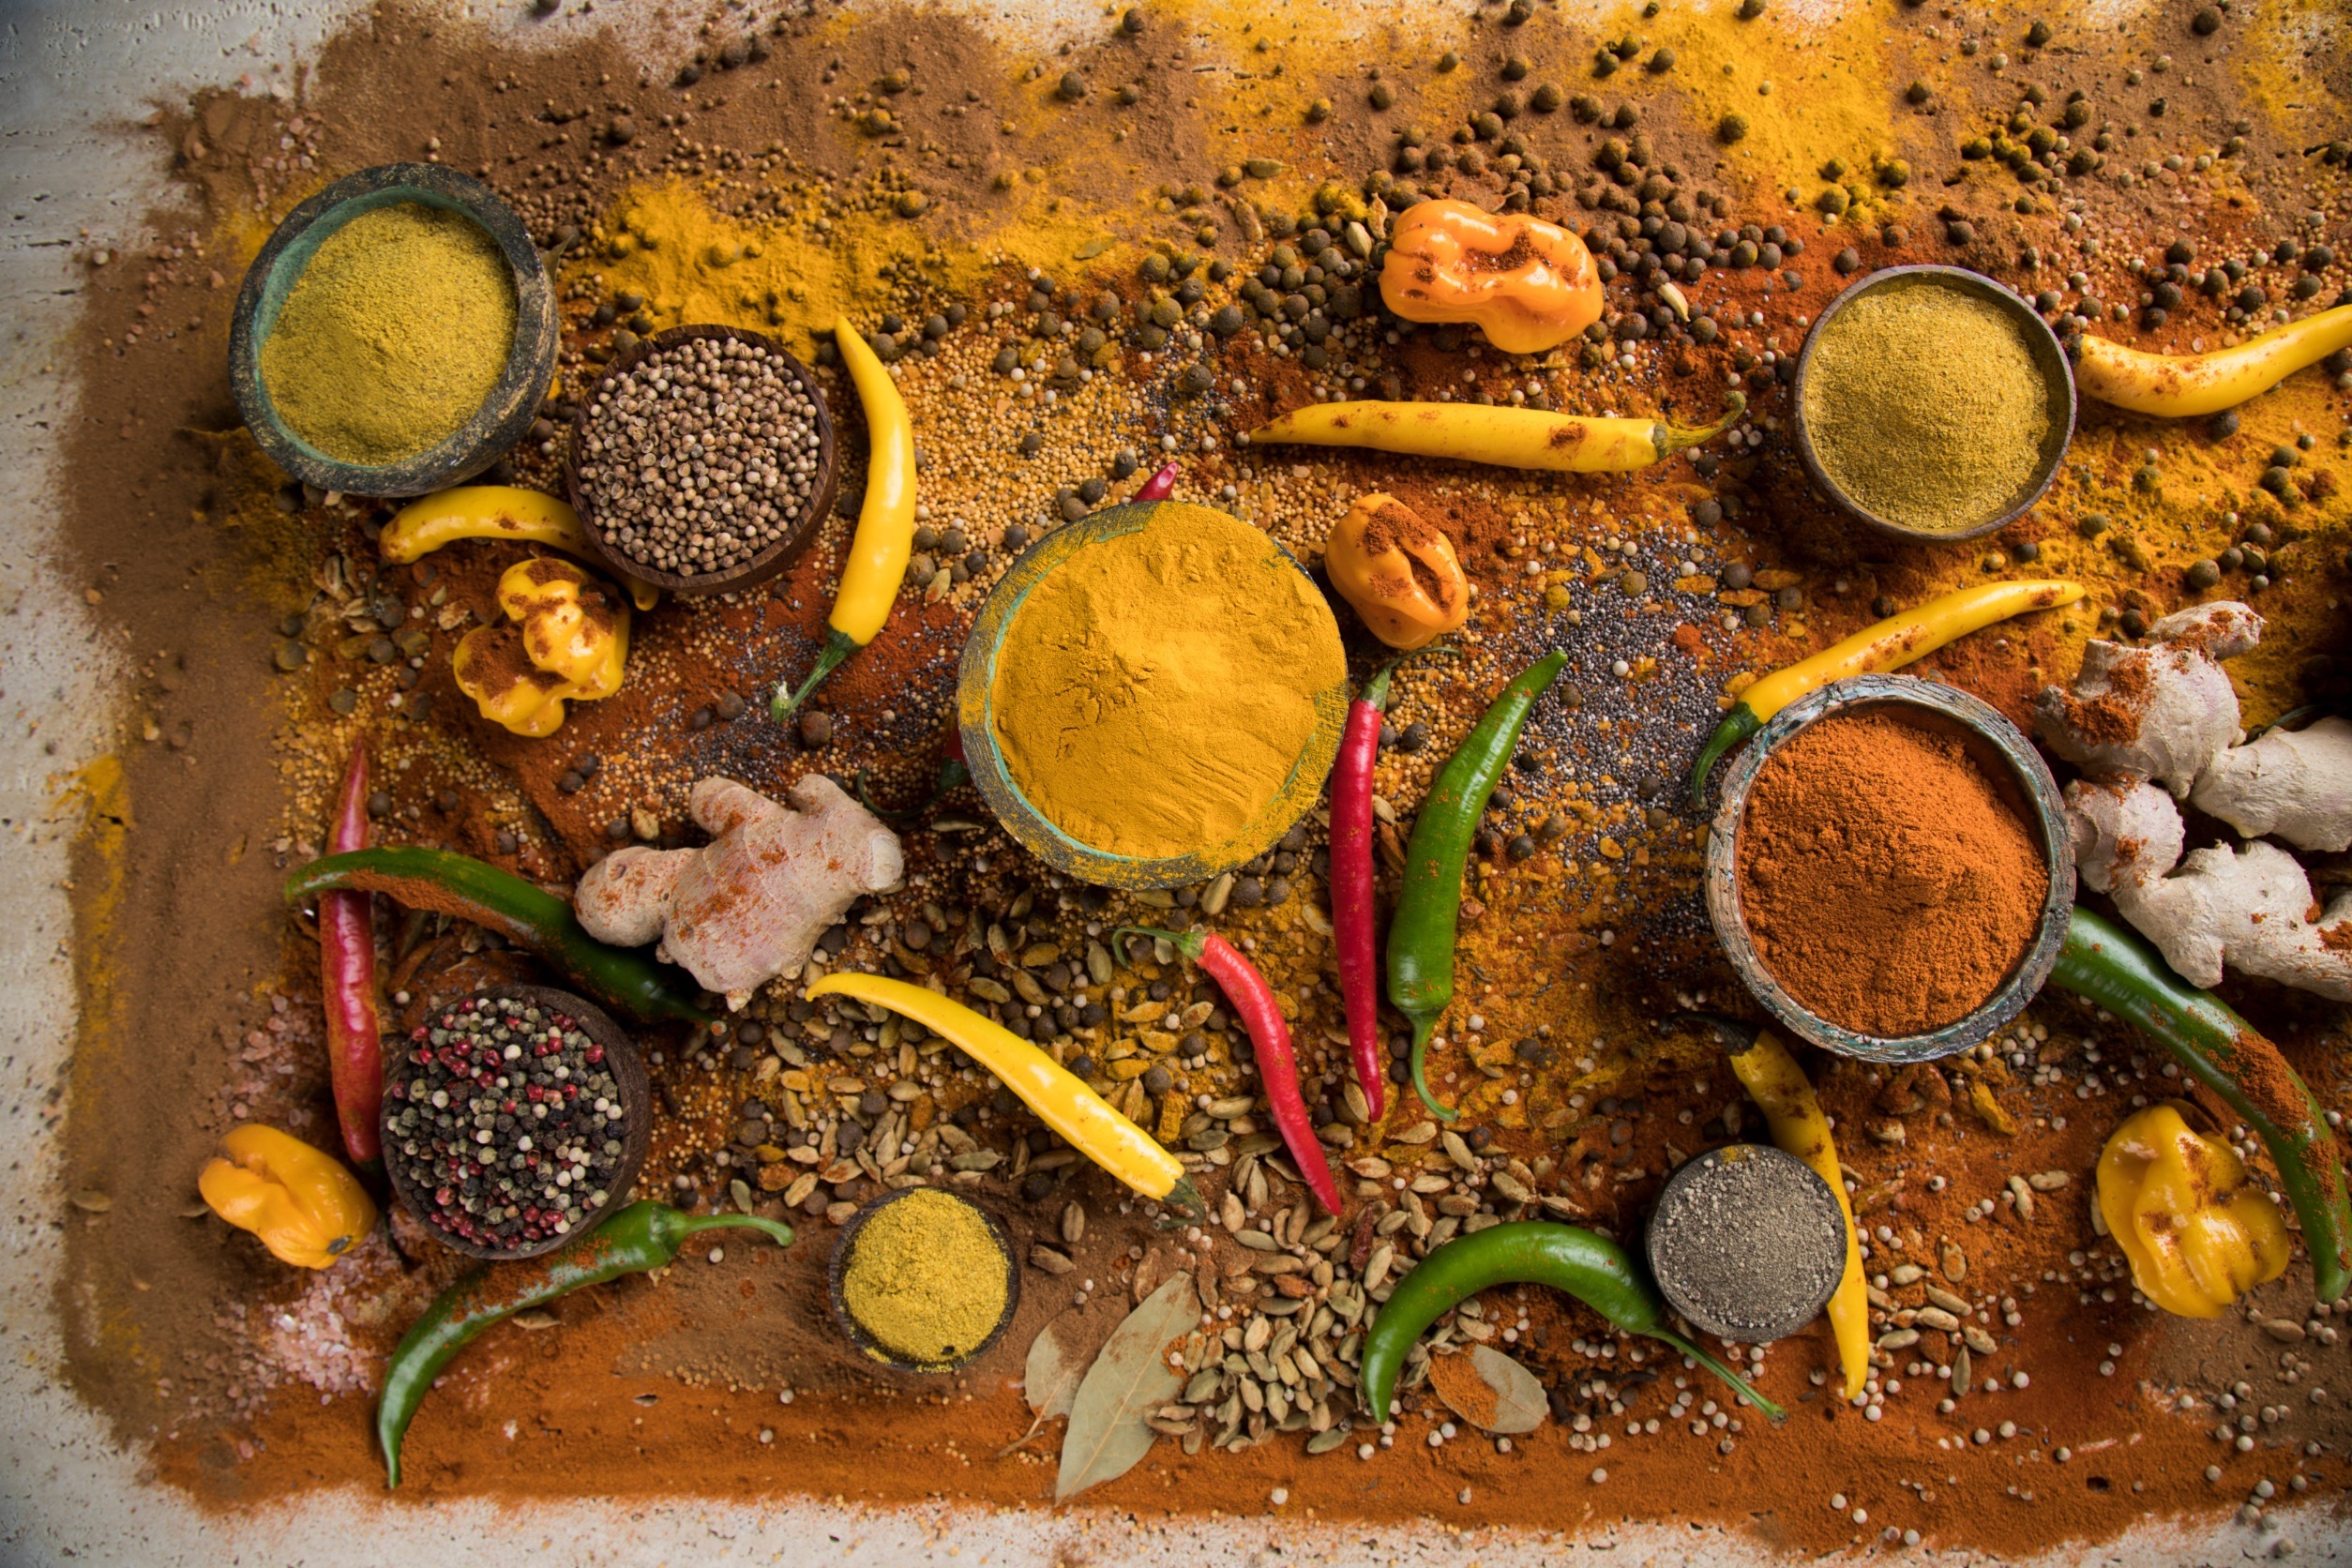 Ingredients for bassar curry powder mixes.